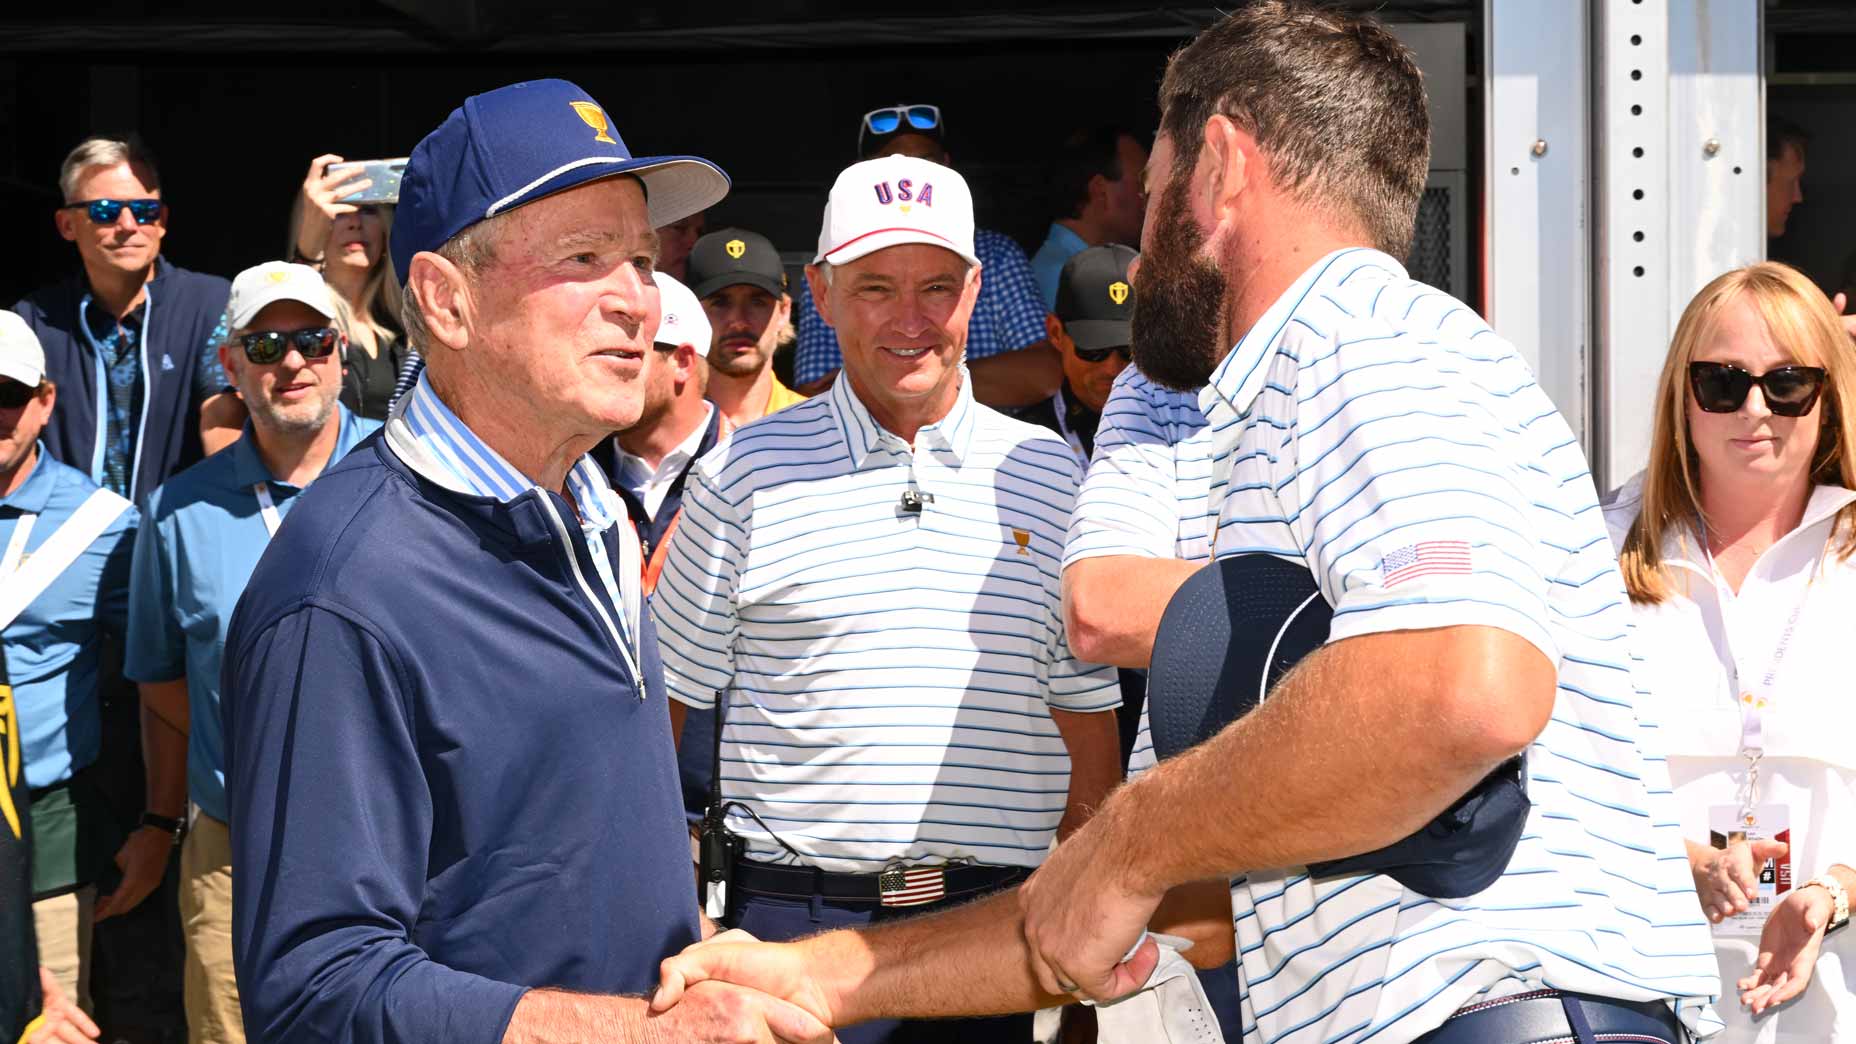 Former President George W. Bush shakes hands with U.S. Team player Cameron Young on the first tee during the second round of Presidents Cup at Quail Hollow September 23, 2022, in Charlotte, North Carolina.